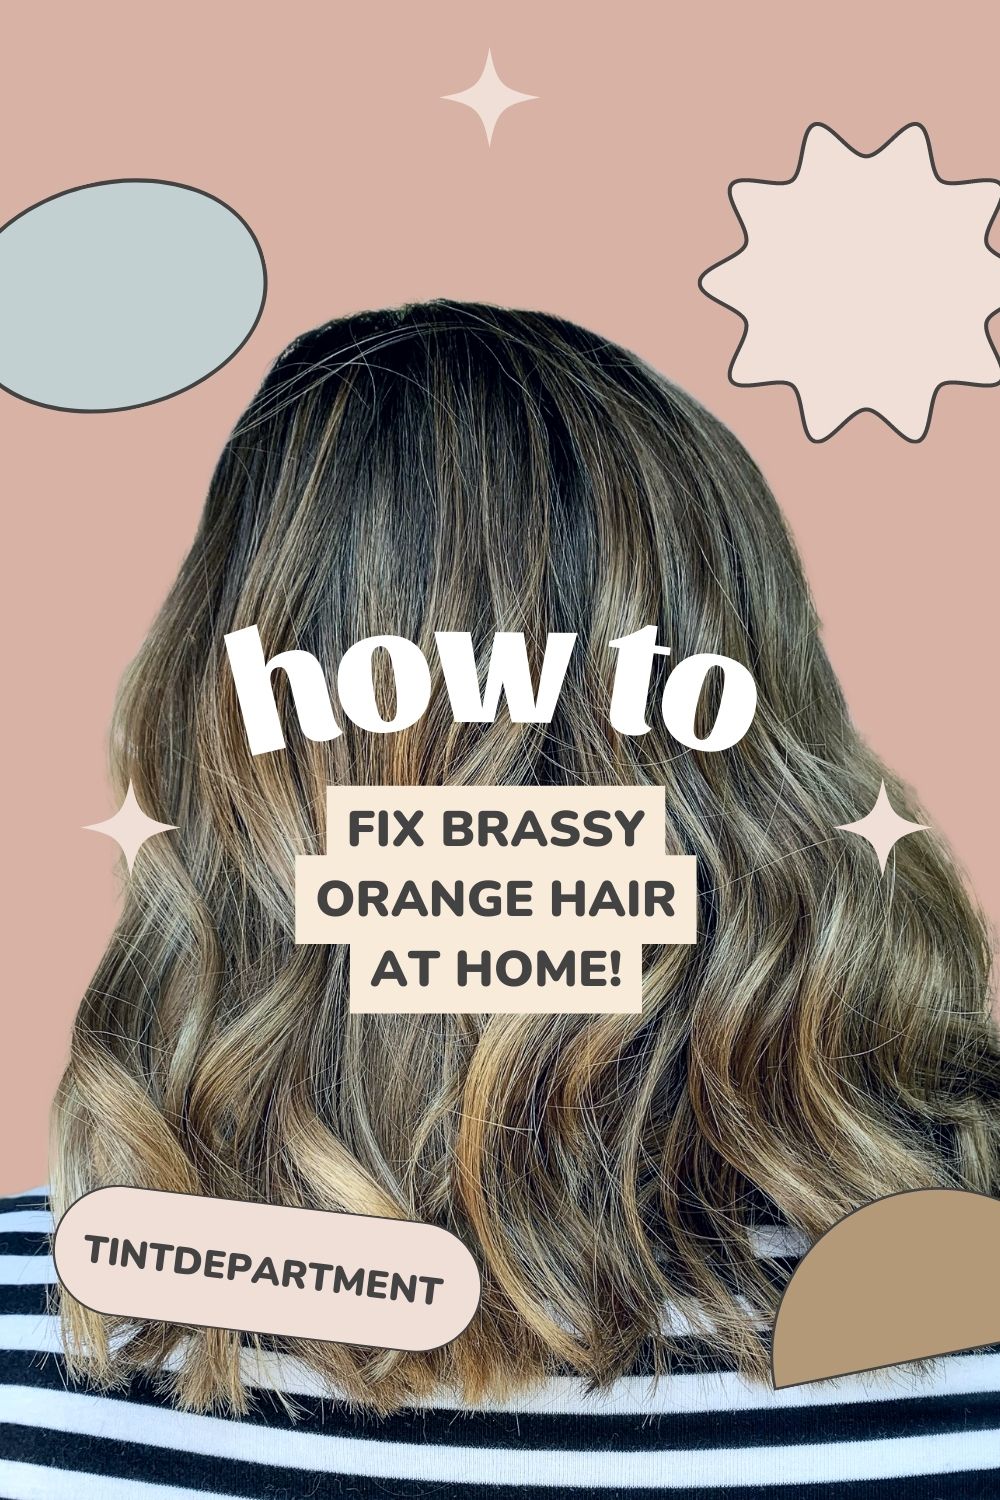 How to Get Rid of Brassy Hair